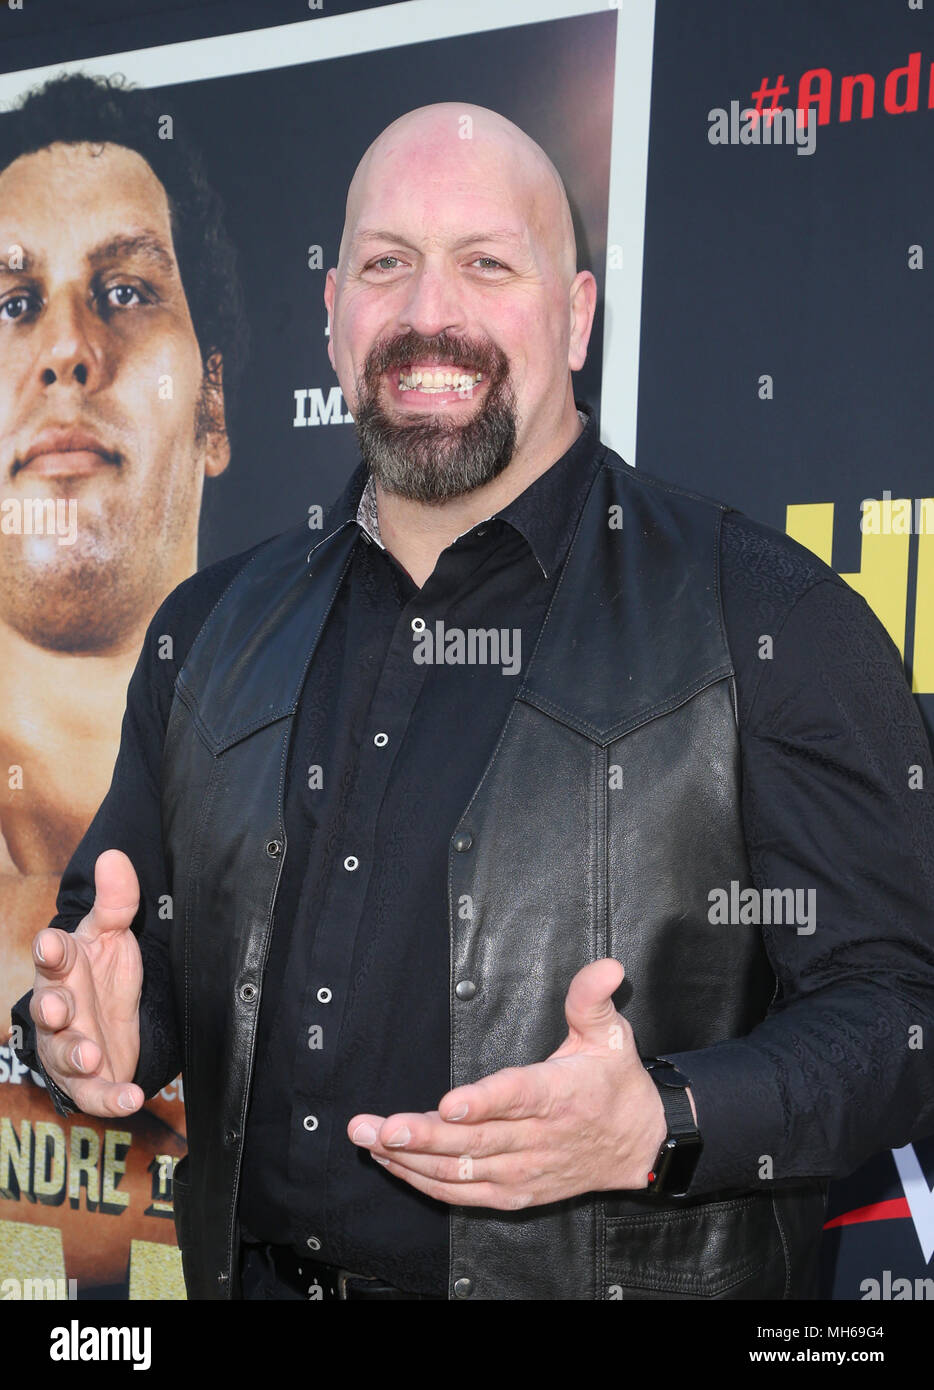 Los Angeles premiere of HBO's 'Andre the Giant' - Arrivals  Featuring: Big Show, Paul Donald Wight II Where: Hollywood, California, United States When: 29 Mar 2018 Credit: FayesVision/WENN.com Stock Photo